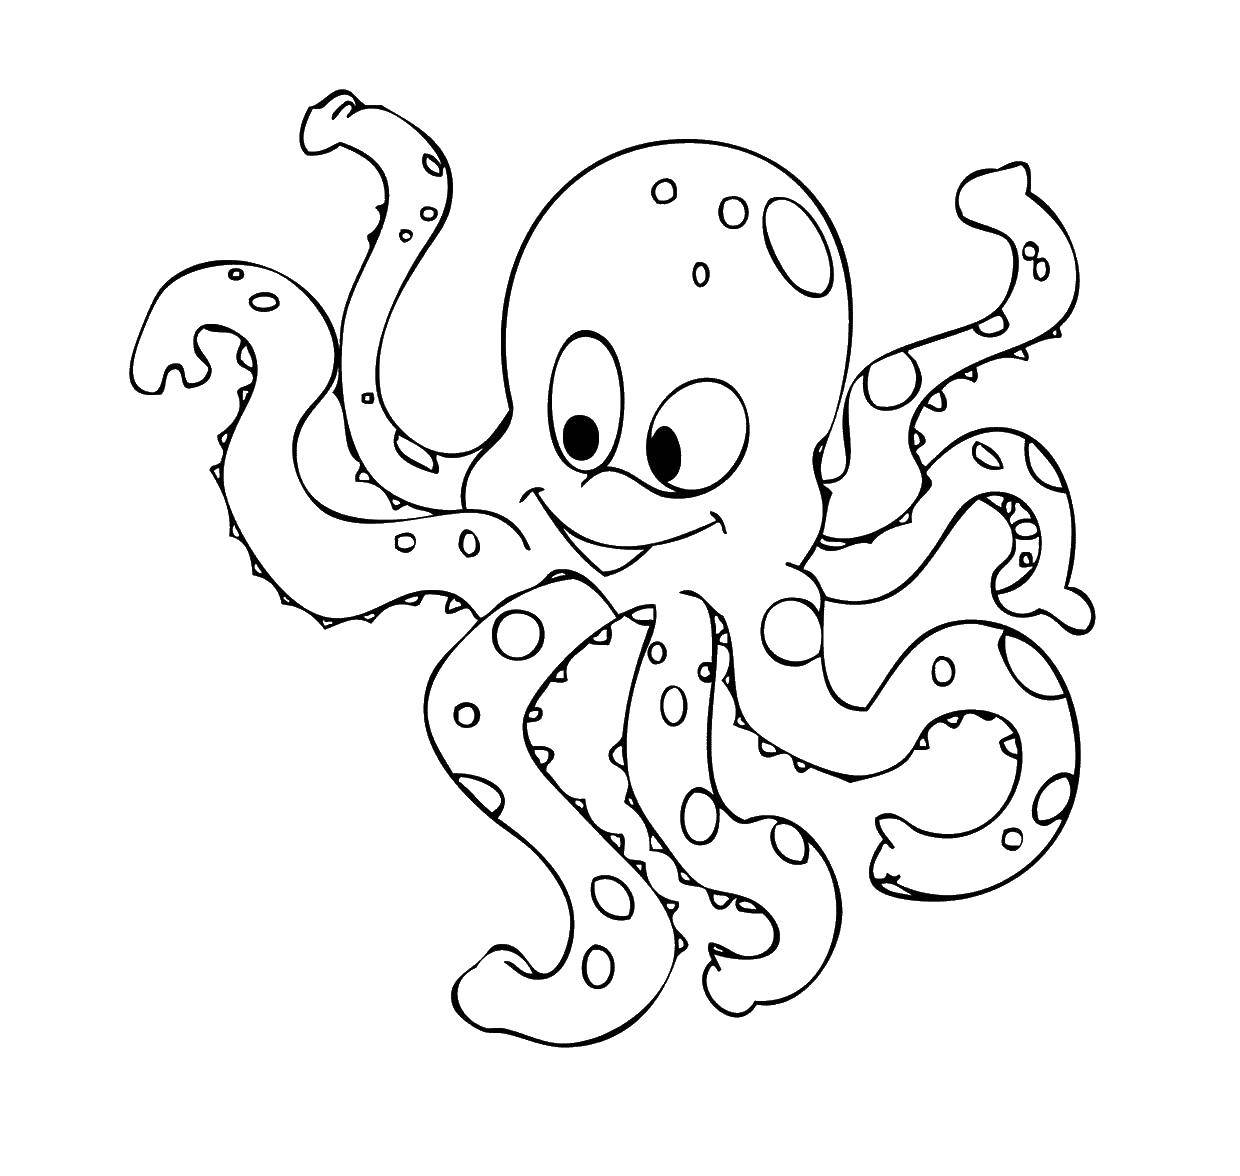 Coloring Octopus. Category fish. Tags:  Octopus.